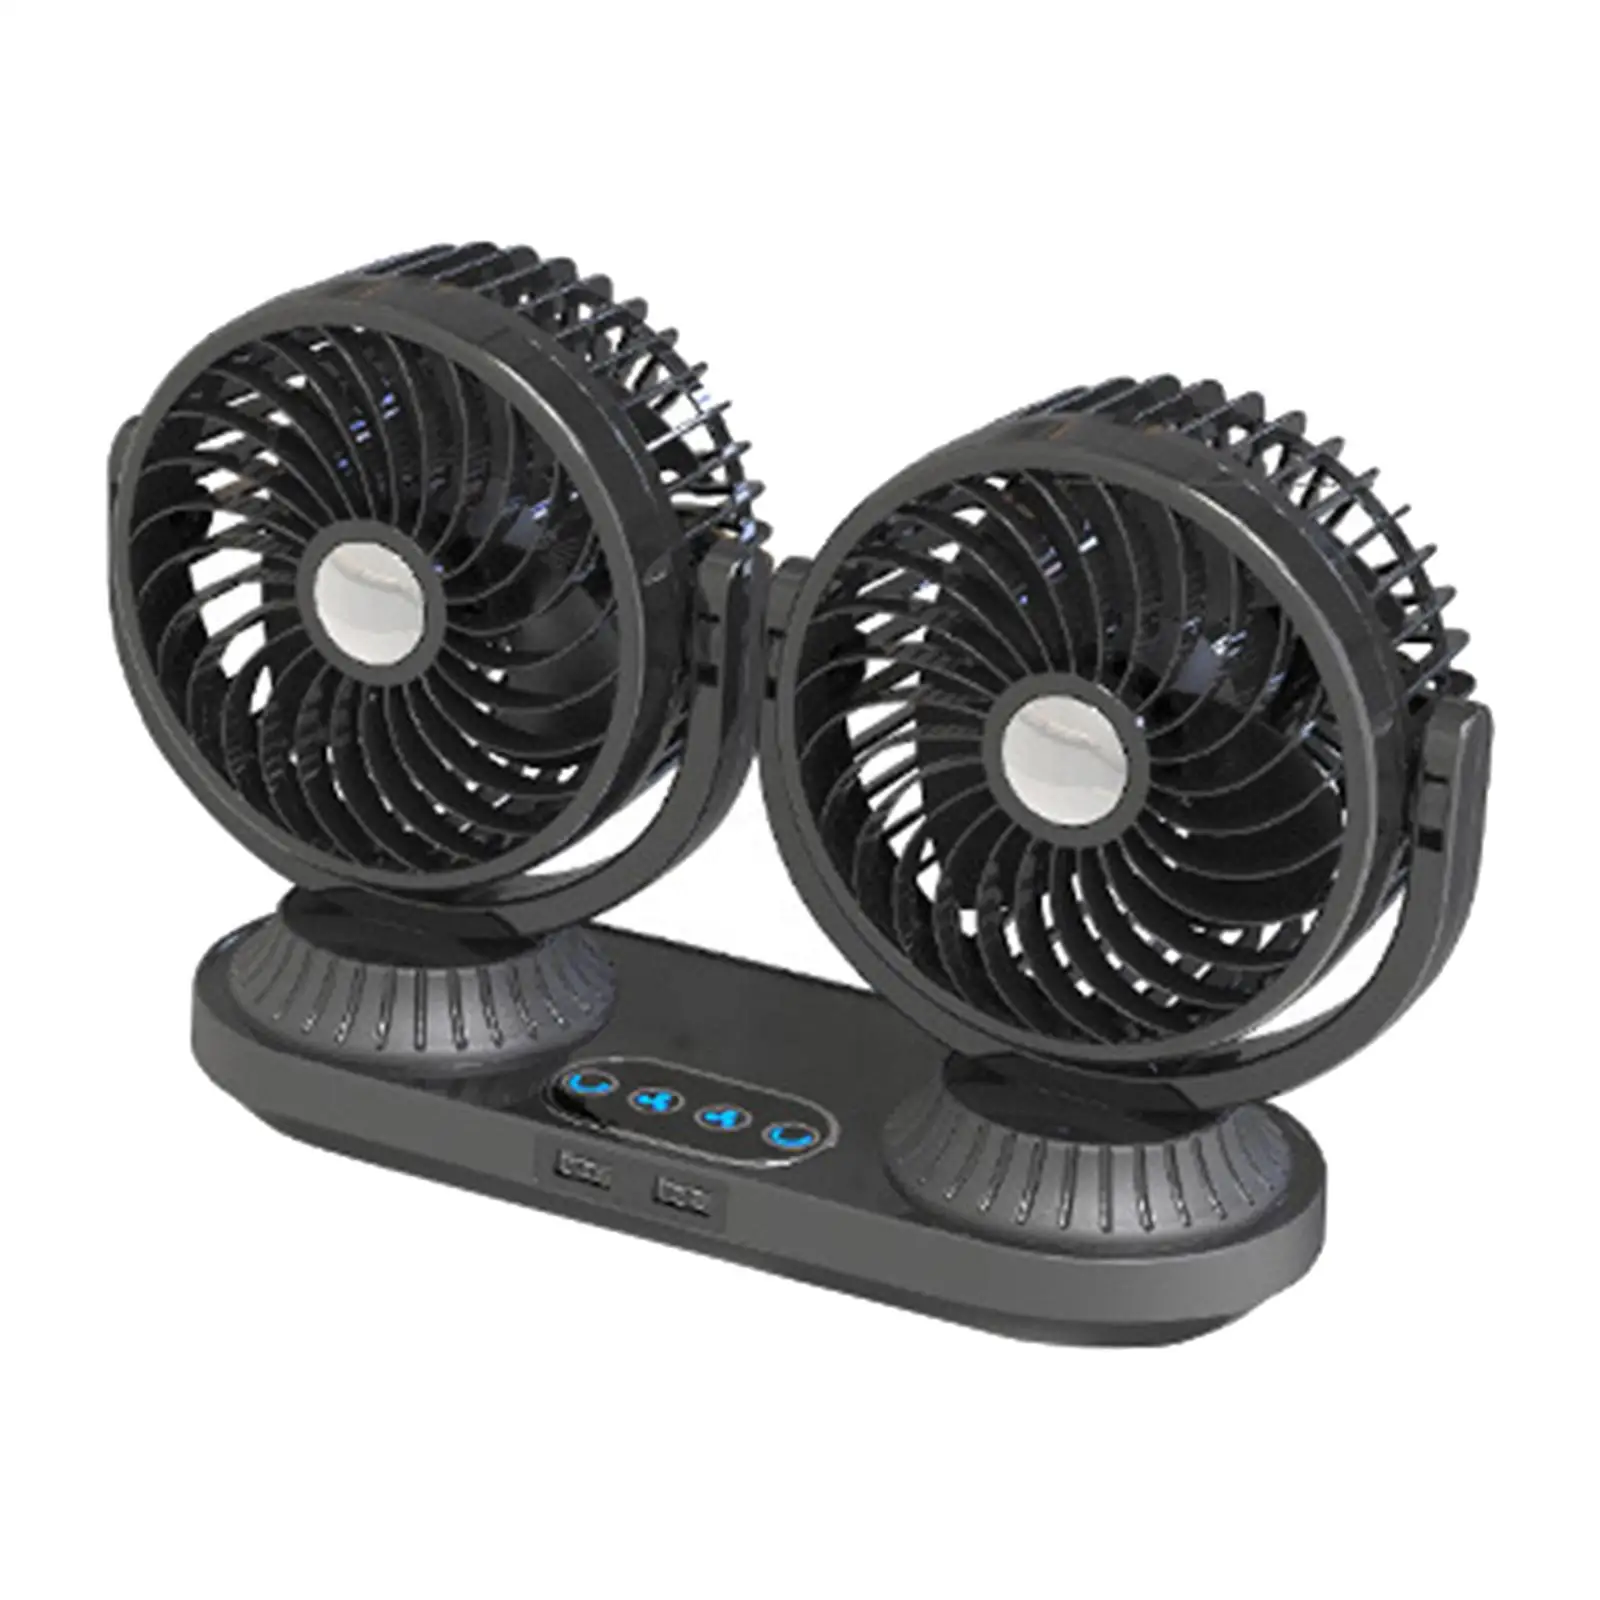 Dual Heads Car Fan 12V 24V Universal Summer Cooling Fan for Car 3 Speeds 360 Left and Right Touch Adjustment Portable Truck Fan